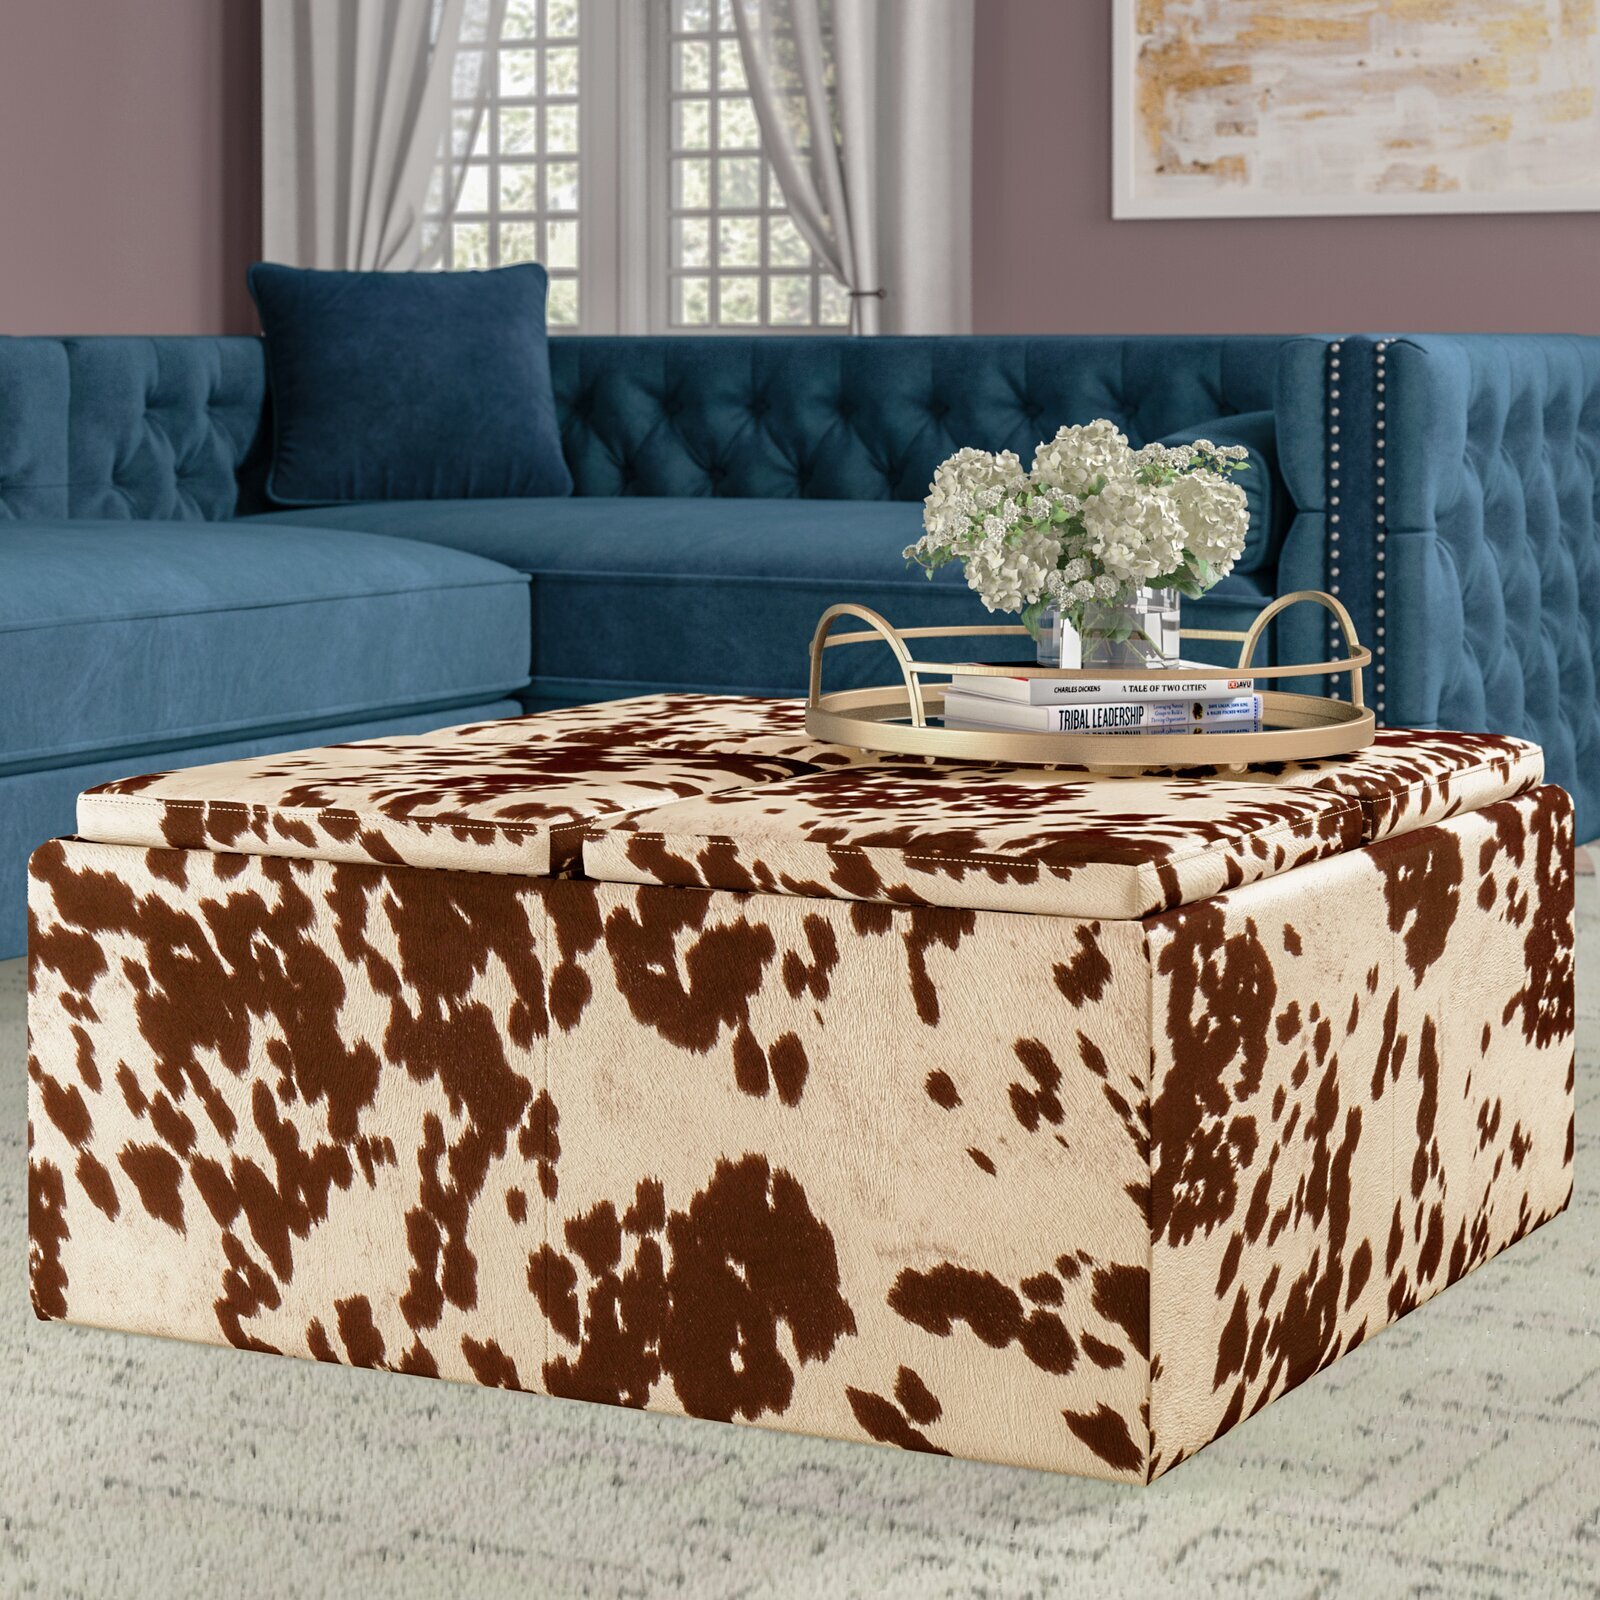 Adding animal prints to your southwestern style furniture